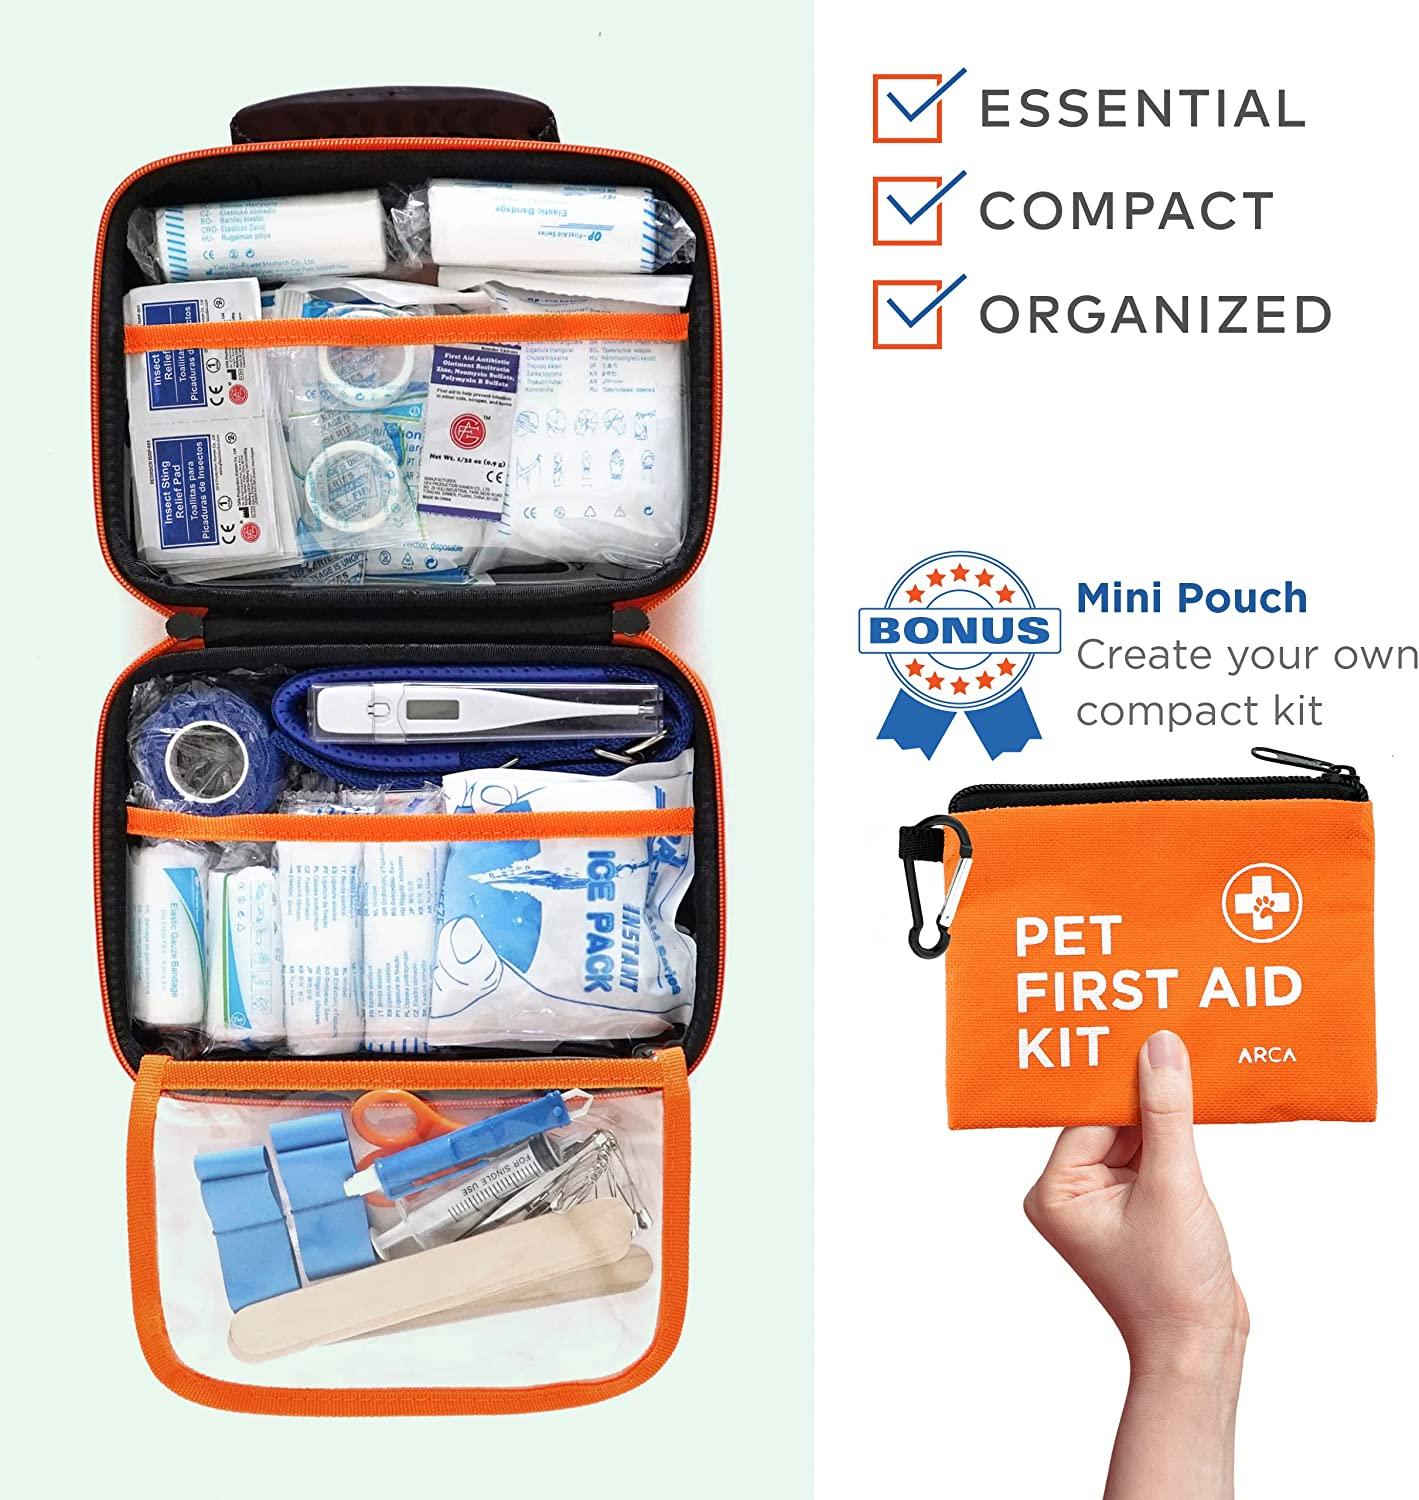 ARCA PET Cat & Dog First Aid Kit Home Office Travel Car Emergency